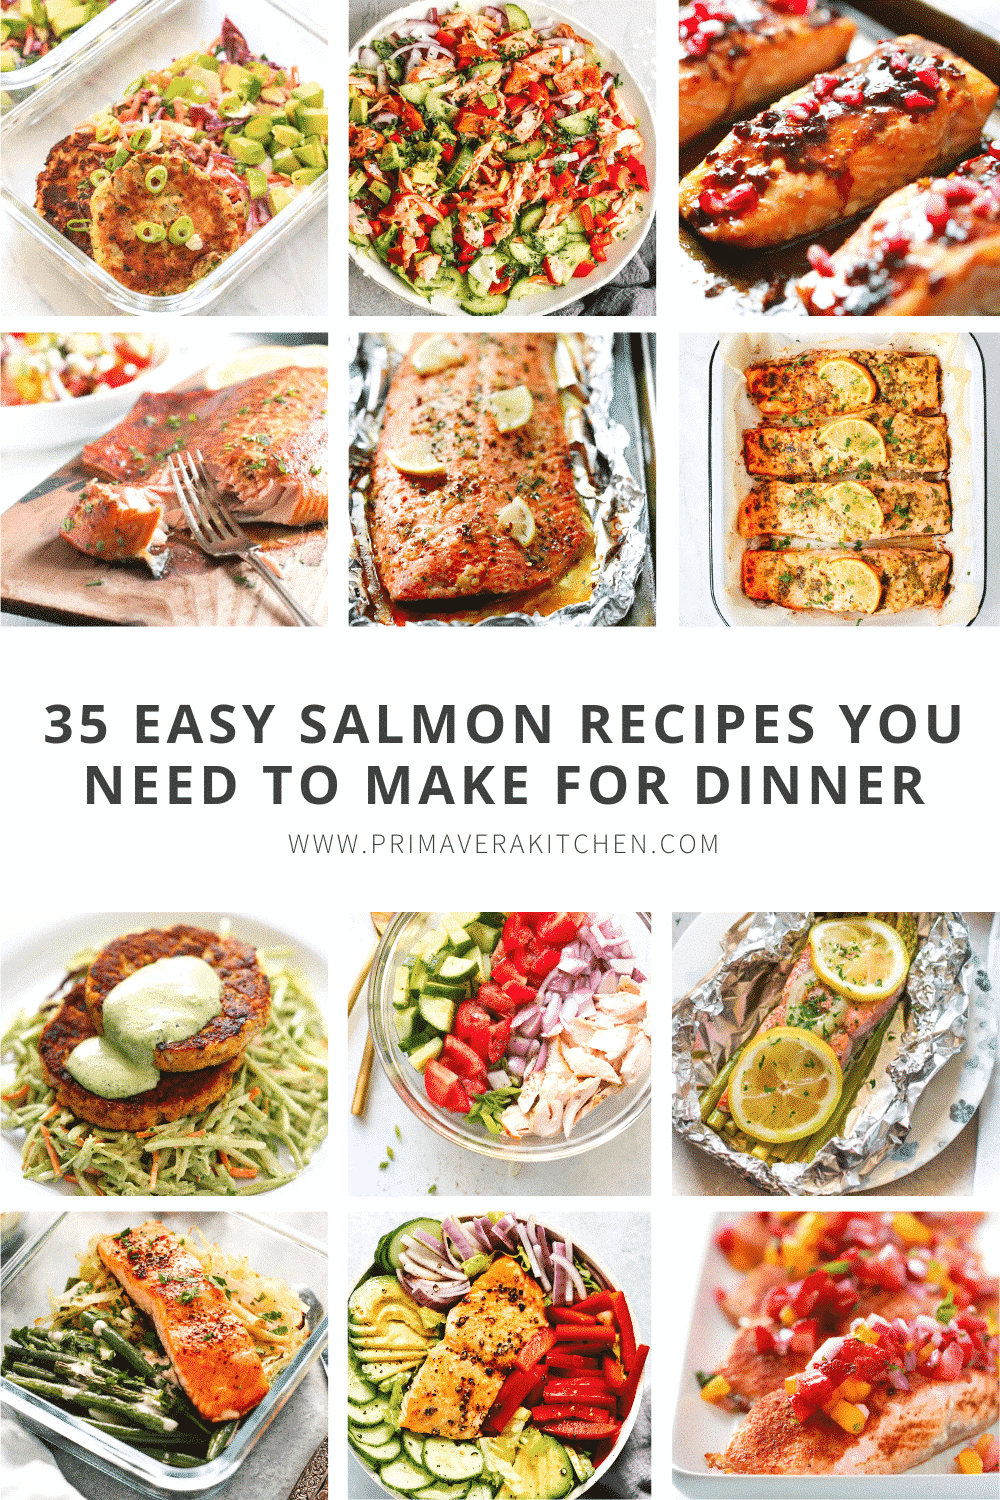 titled photo collage (and shown): 35 easy salmon recipes you need to make for dinner
